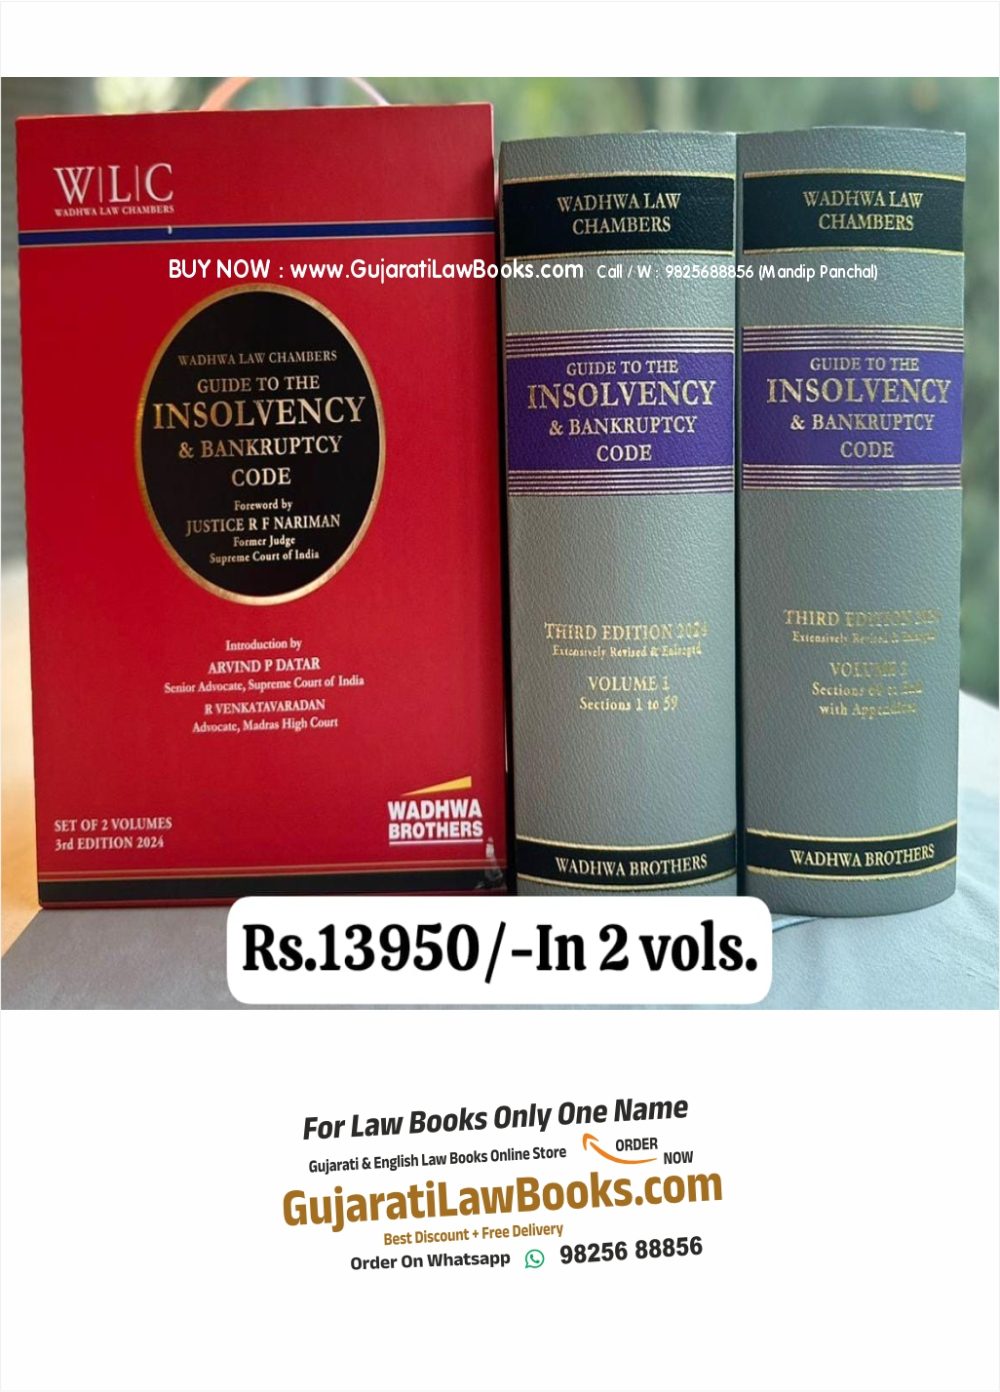 Wadhwa Law Chambers - GUIDE TO THE INSOLVENCY AND BANKRUPTCY CODE IN 2 VOLUME - Latest 3rd Edition October 2023